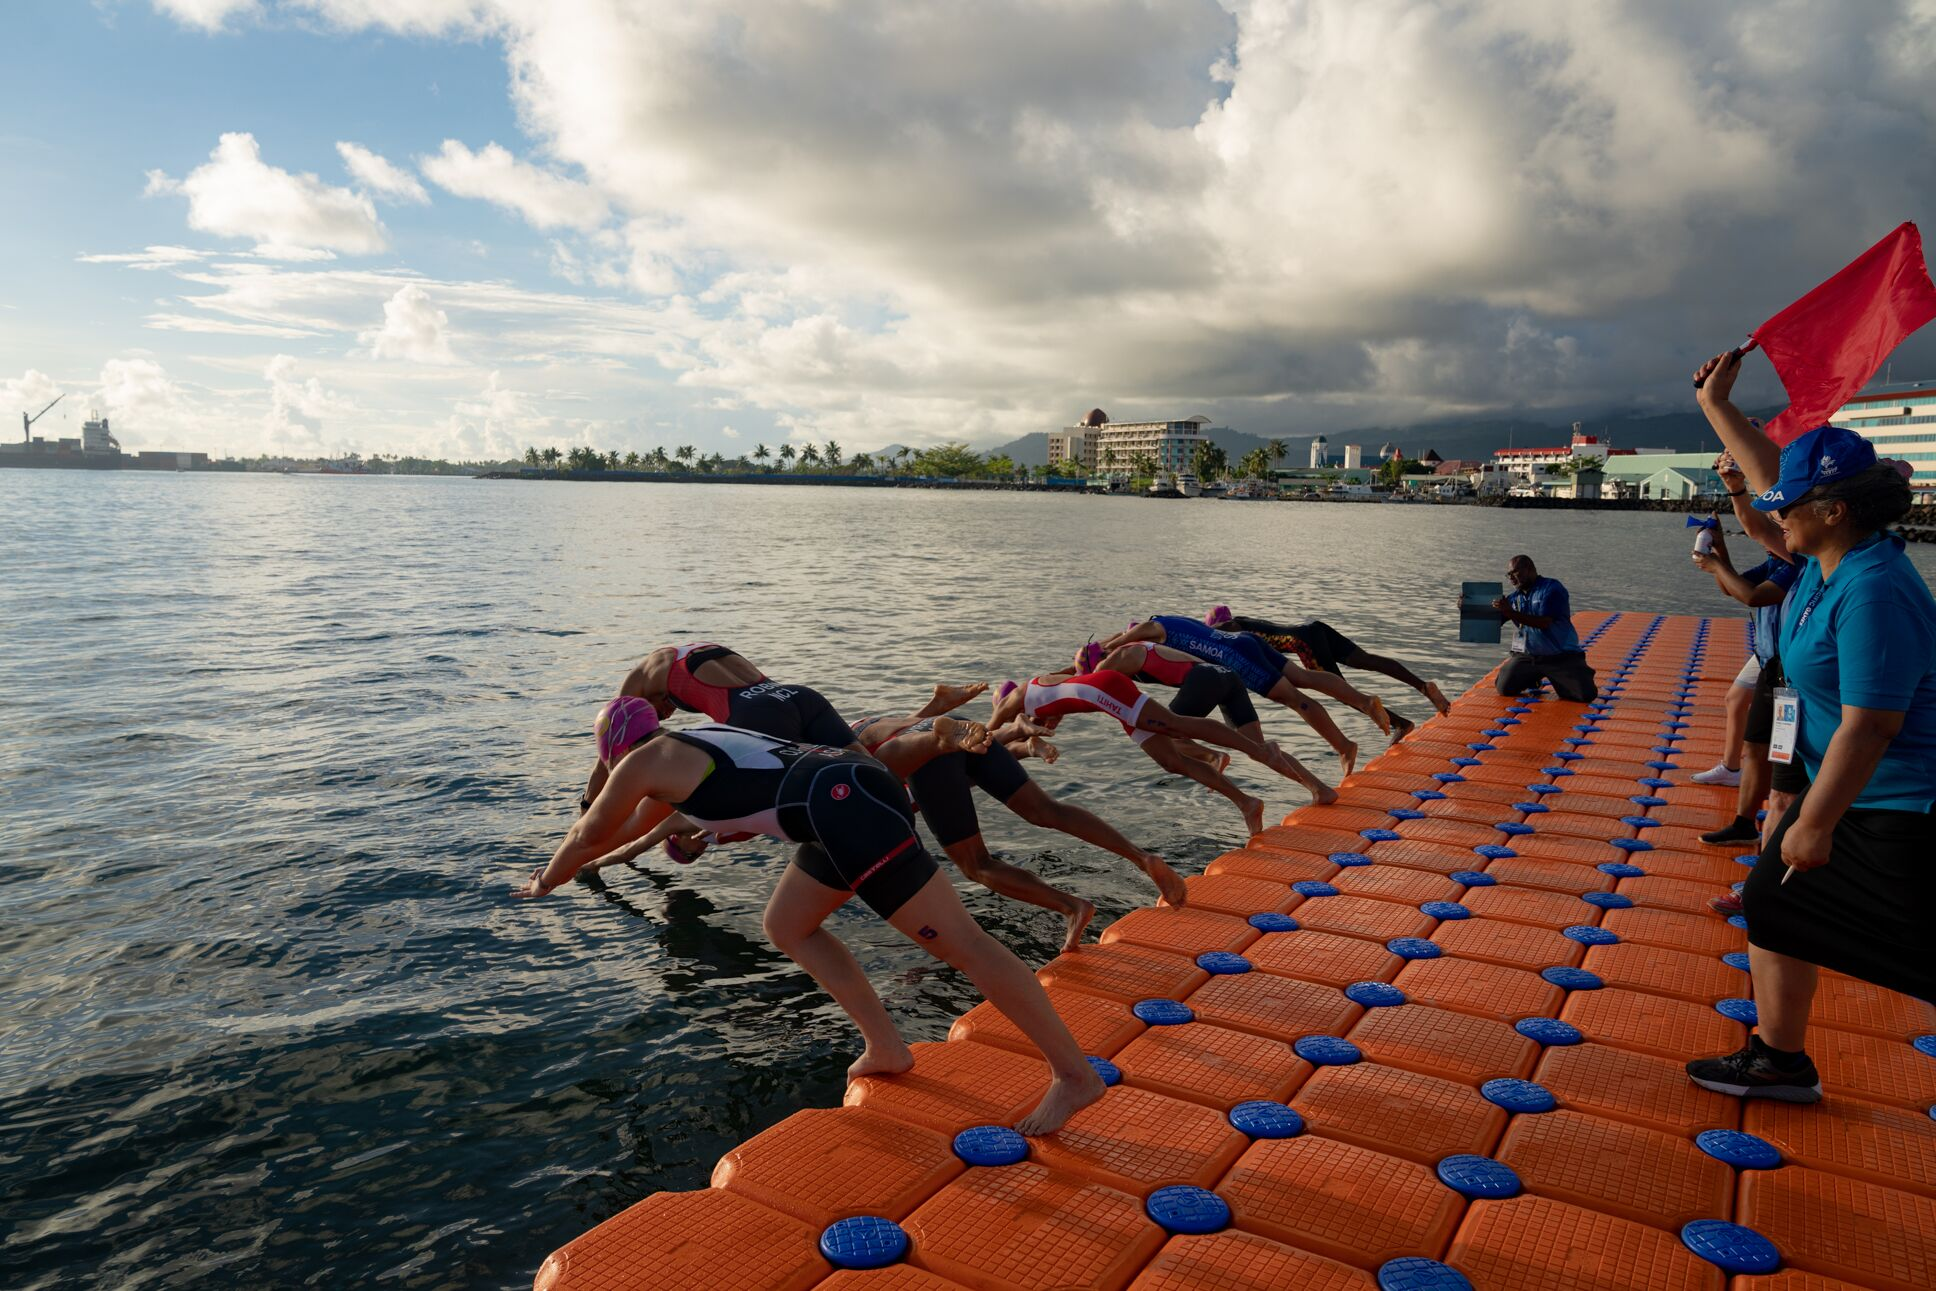 Triathlon competition was also held ©Pacific Games News Service